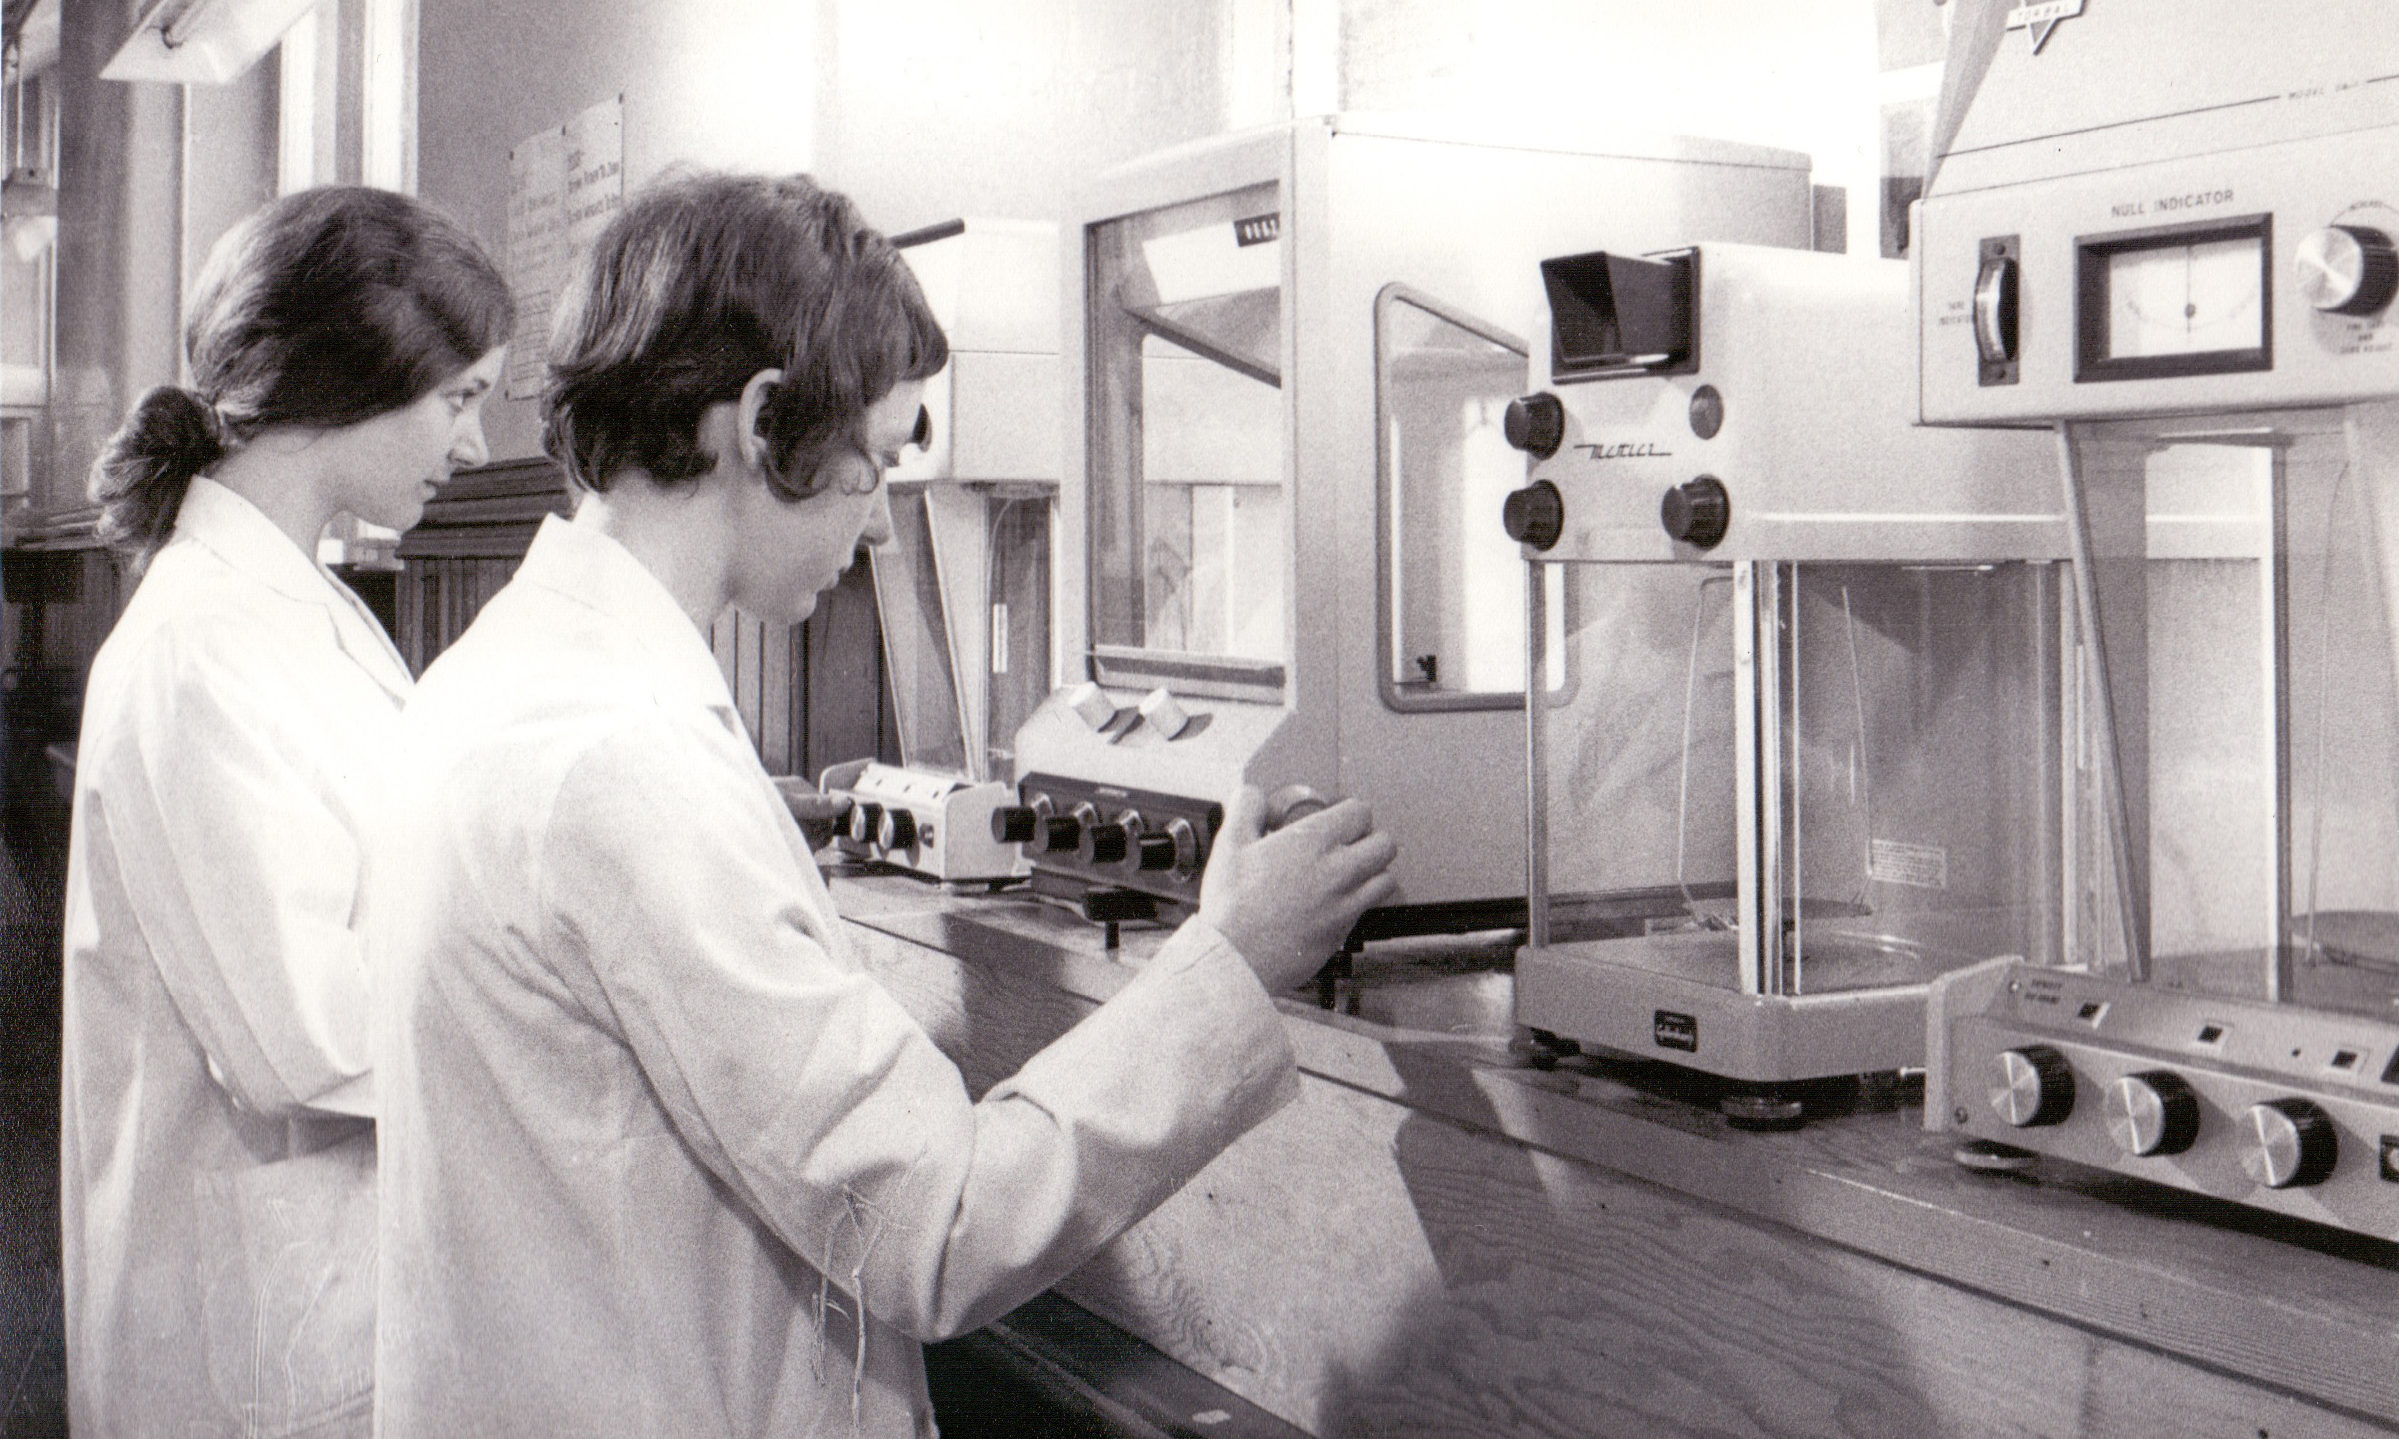 Students conduct an experiment at Dundee College of Technology c. 1971